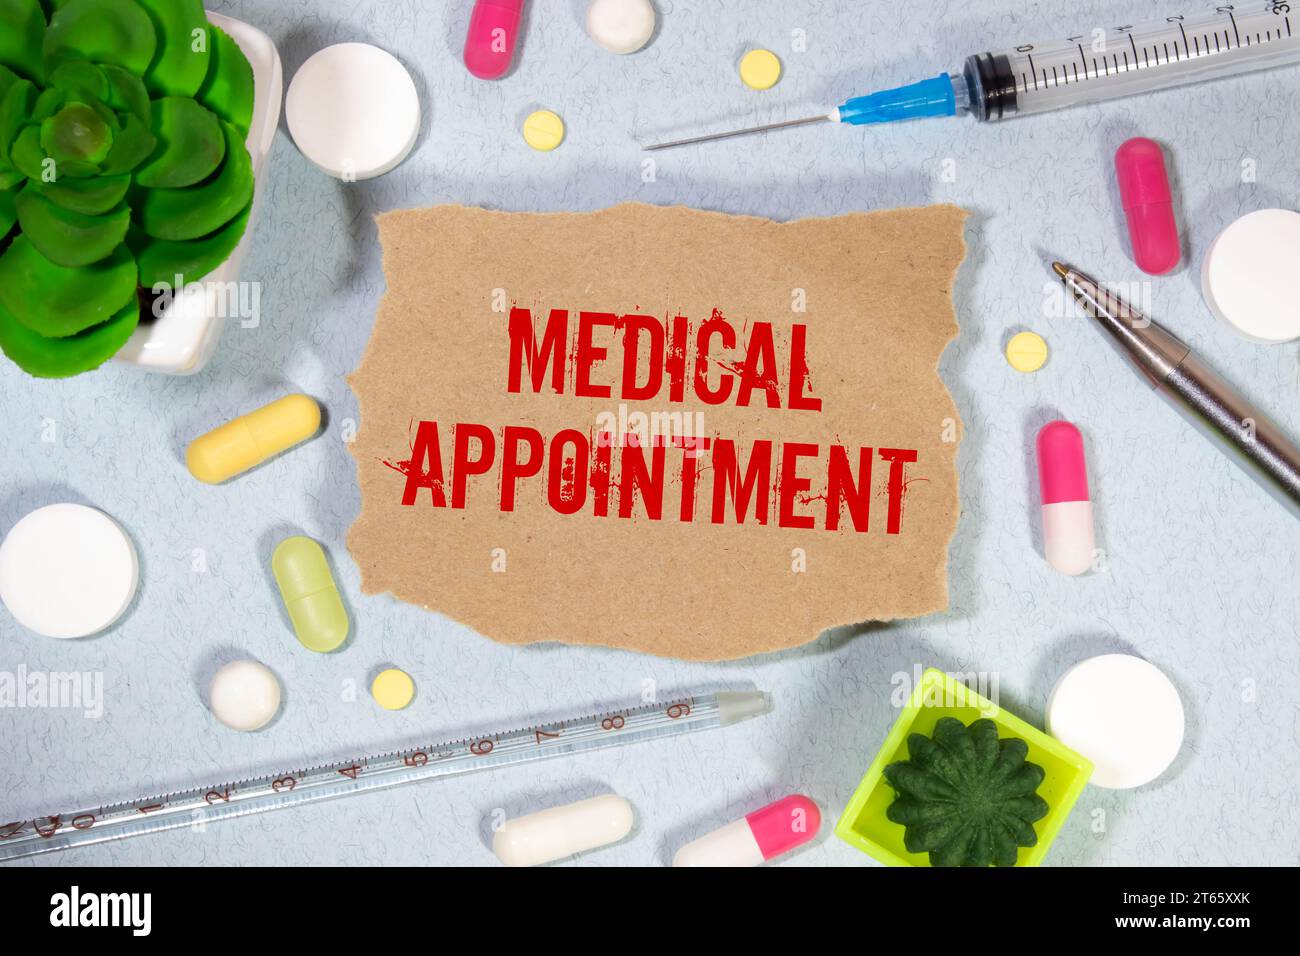 Medical appointment. text on white paper, blue background, near pills and stethoscope in blue Stock Photo